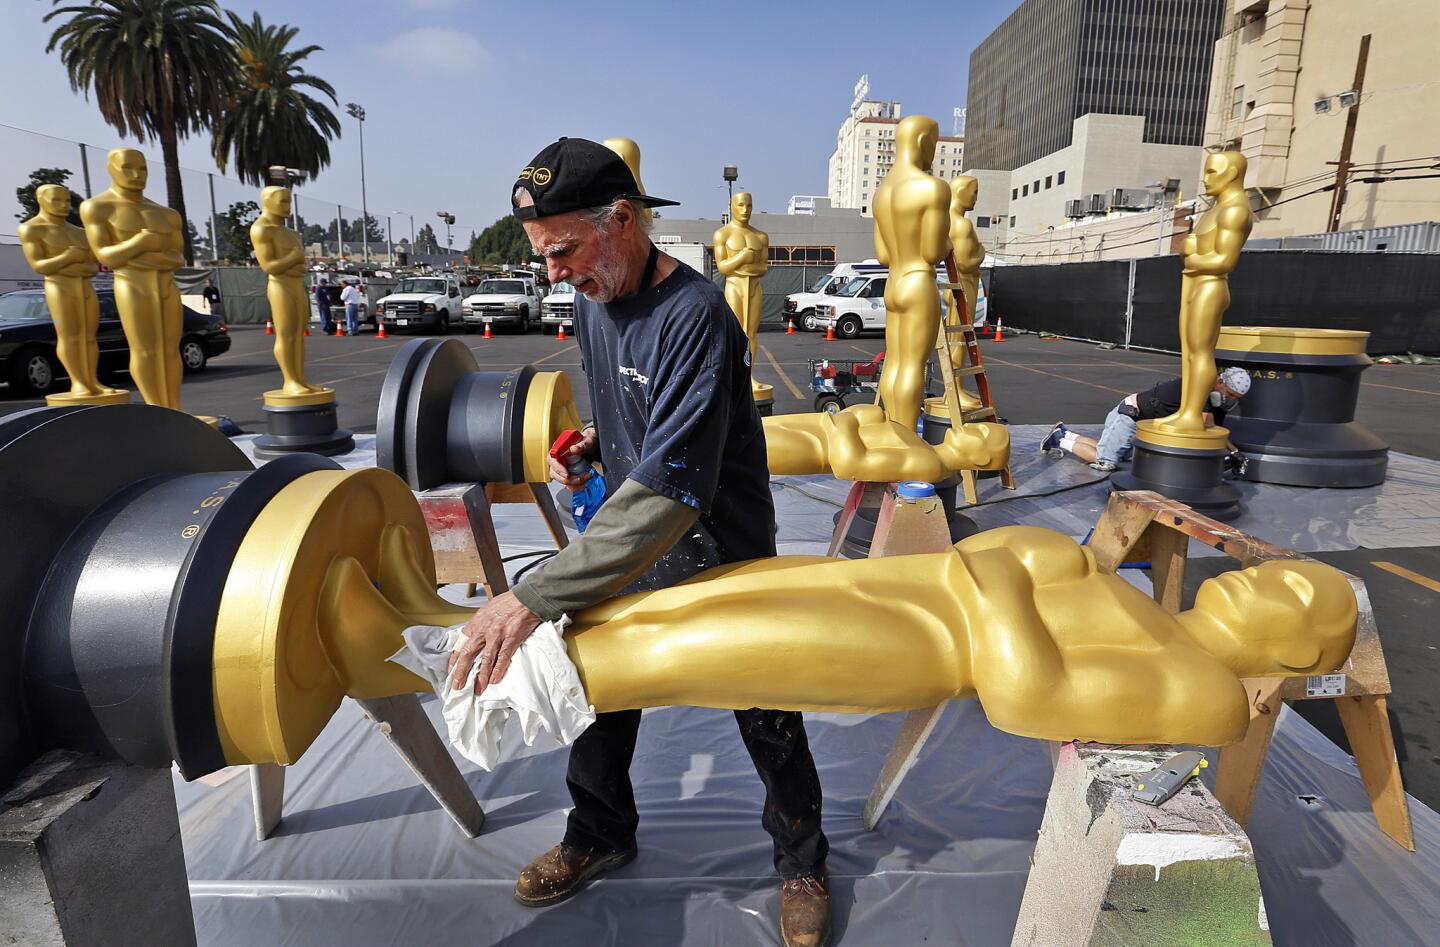 Scenic artist Sam Costa on Tuesday prepares one of the many Oscar statues that will receive a new coat of paint before being placed around the Hollywood & Highland complex this week in anticipation of Sunday's Academy Awards ceremony at the Dolby Theatre.